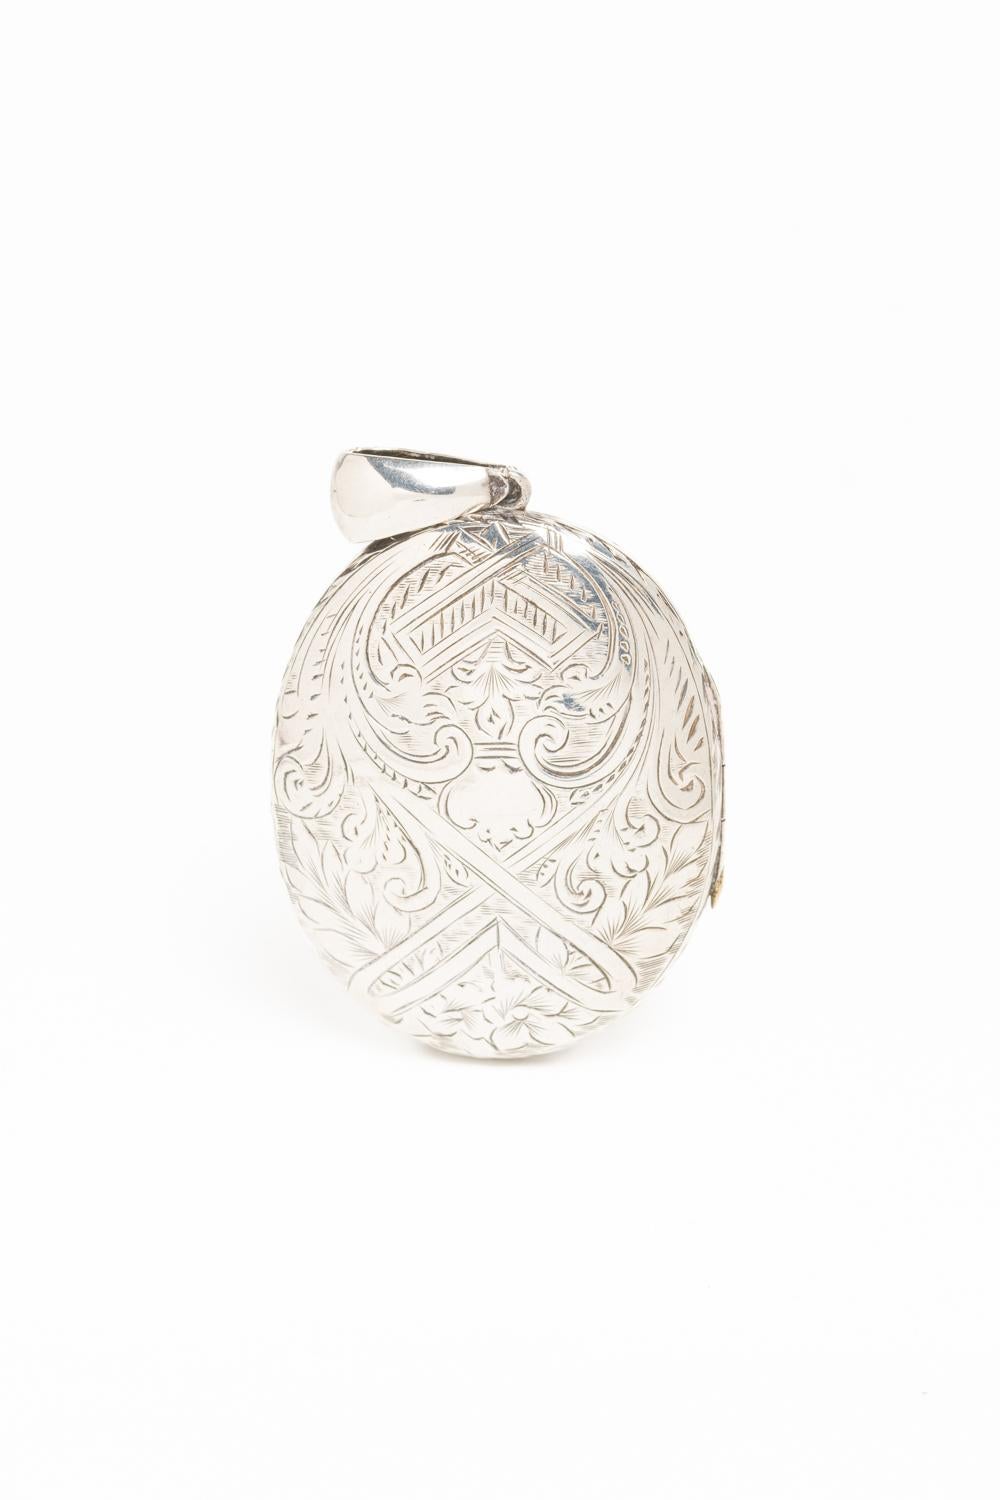 This gorgeous antique sterling silver large oval locket dated 1879. Beautifully engraved with a floral motif in the from of the locket and a geometric, scrolled motif on the reverse. Distinctively different designs on the from and back make this